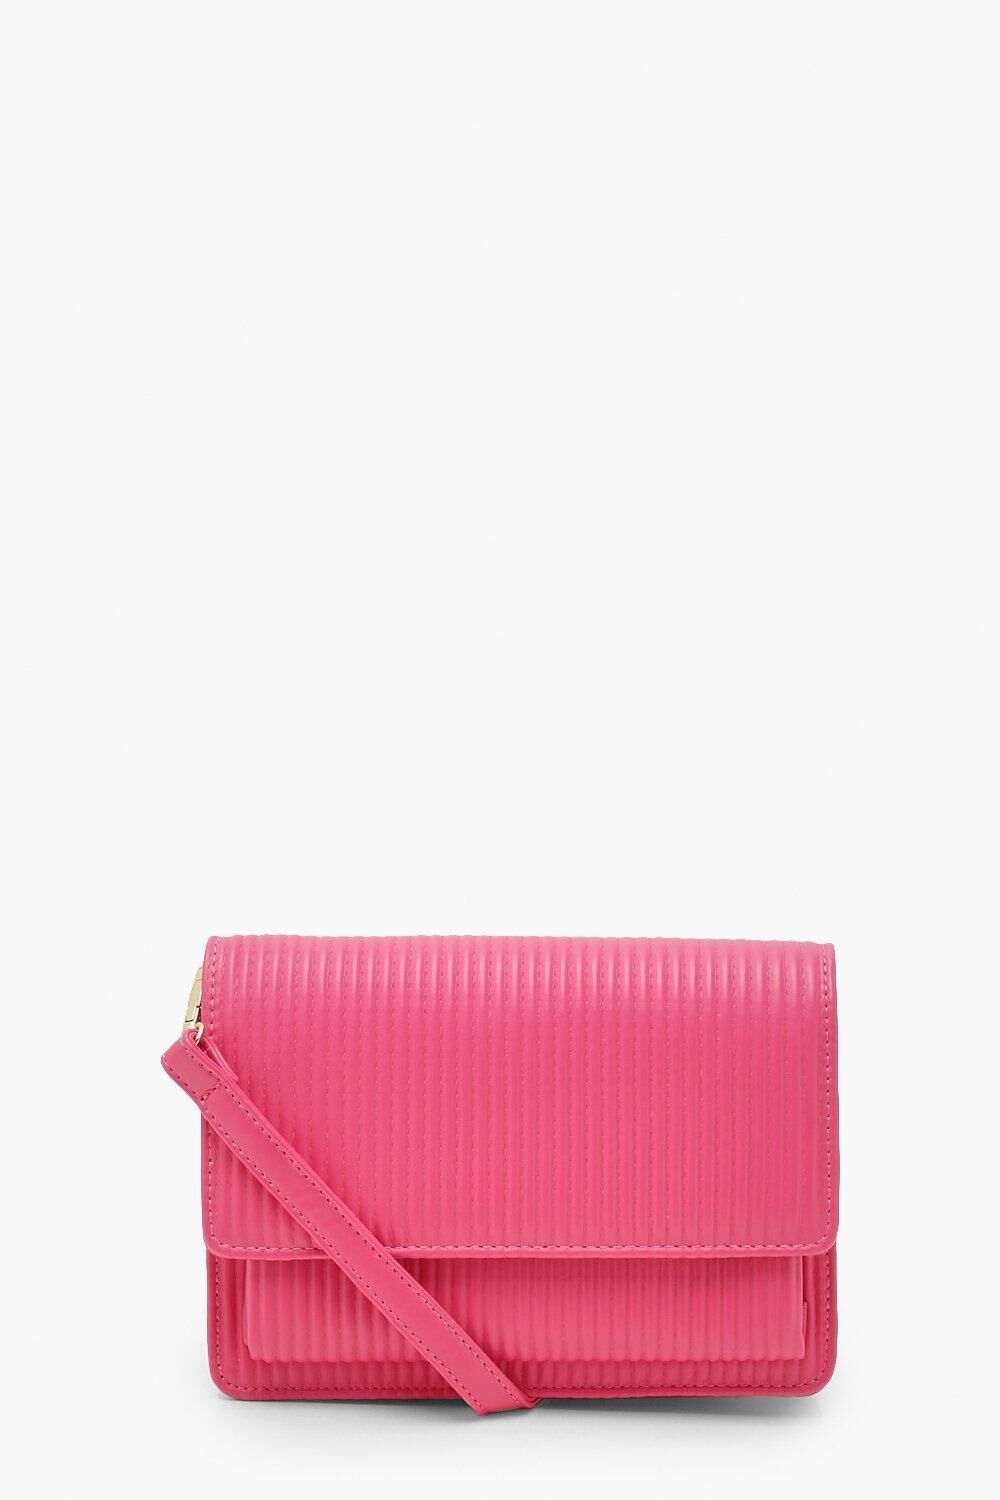 Boohoo Ribbed Soft Pu Cross Body Bag- Pink  - Size: ONE SIZE